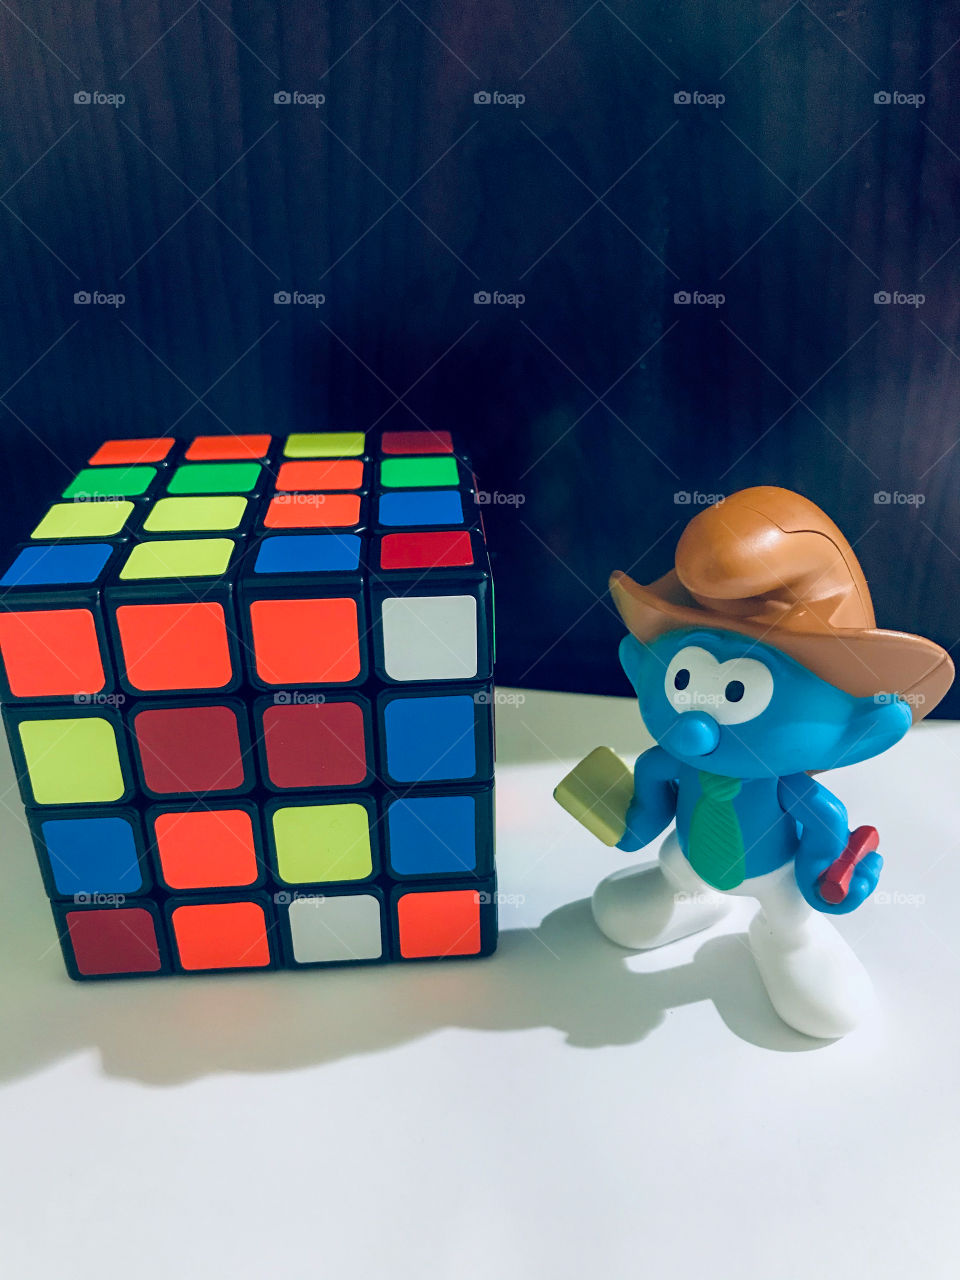 Can you help me to solve this rubix cube